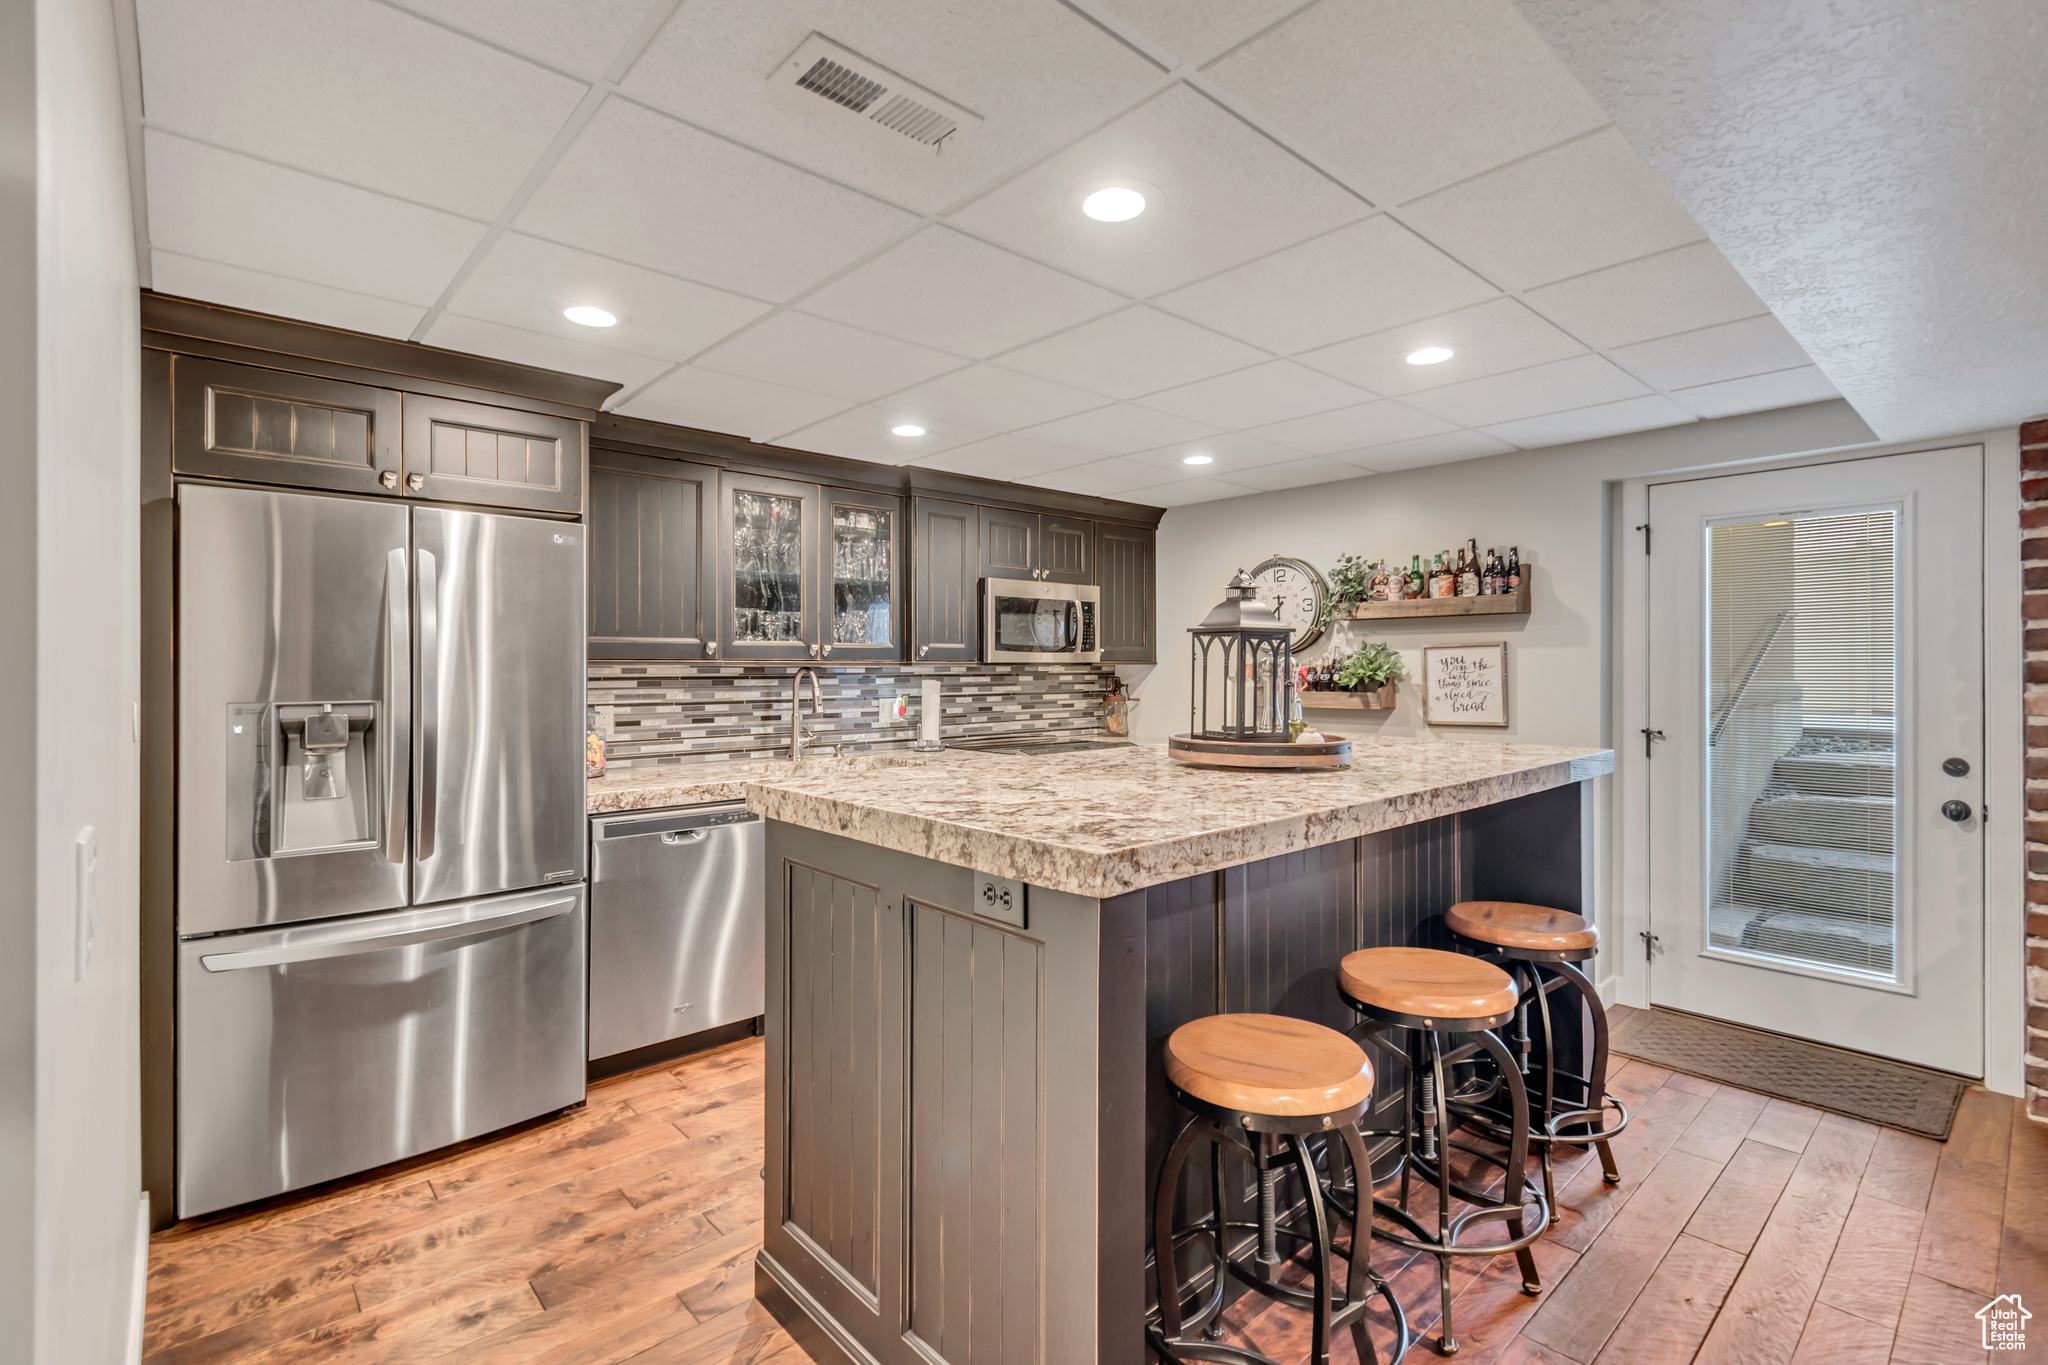 Full basement kitchen with stainless steel appliances